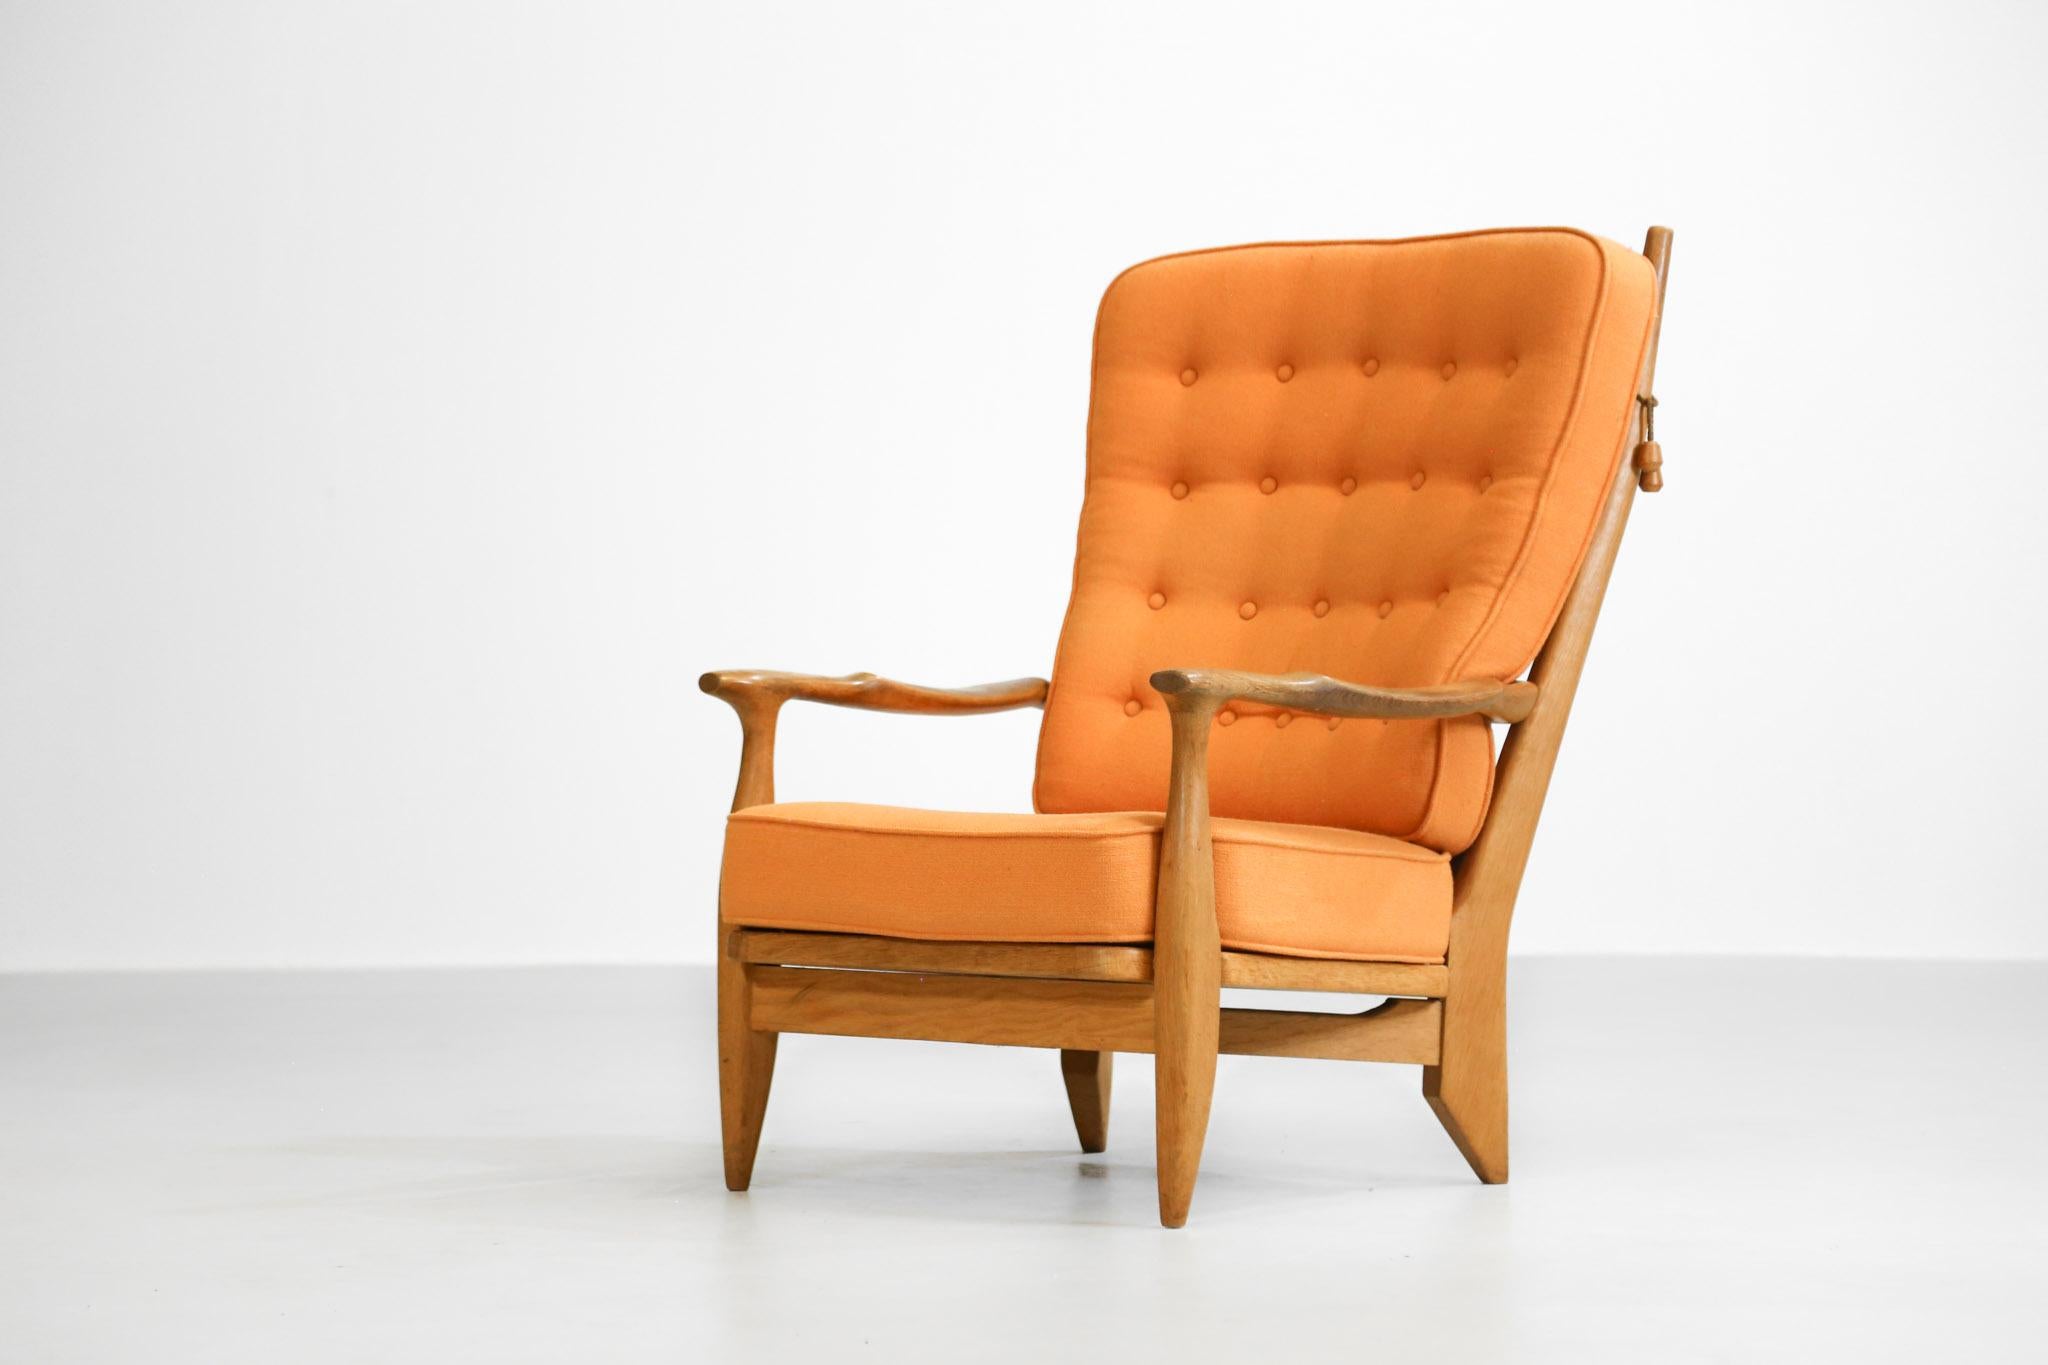 Armchair by french designers Guillerme et Chambron for Votre Maison.
Structure in solid oak with original orange fabric in excellent shape
Please take a look to the many details of this product such as the leg or the back.